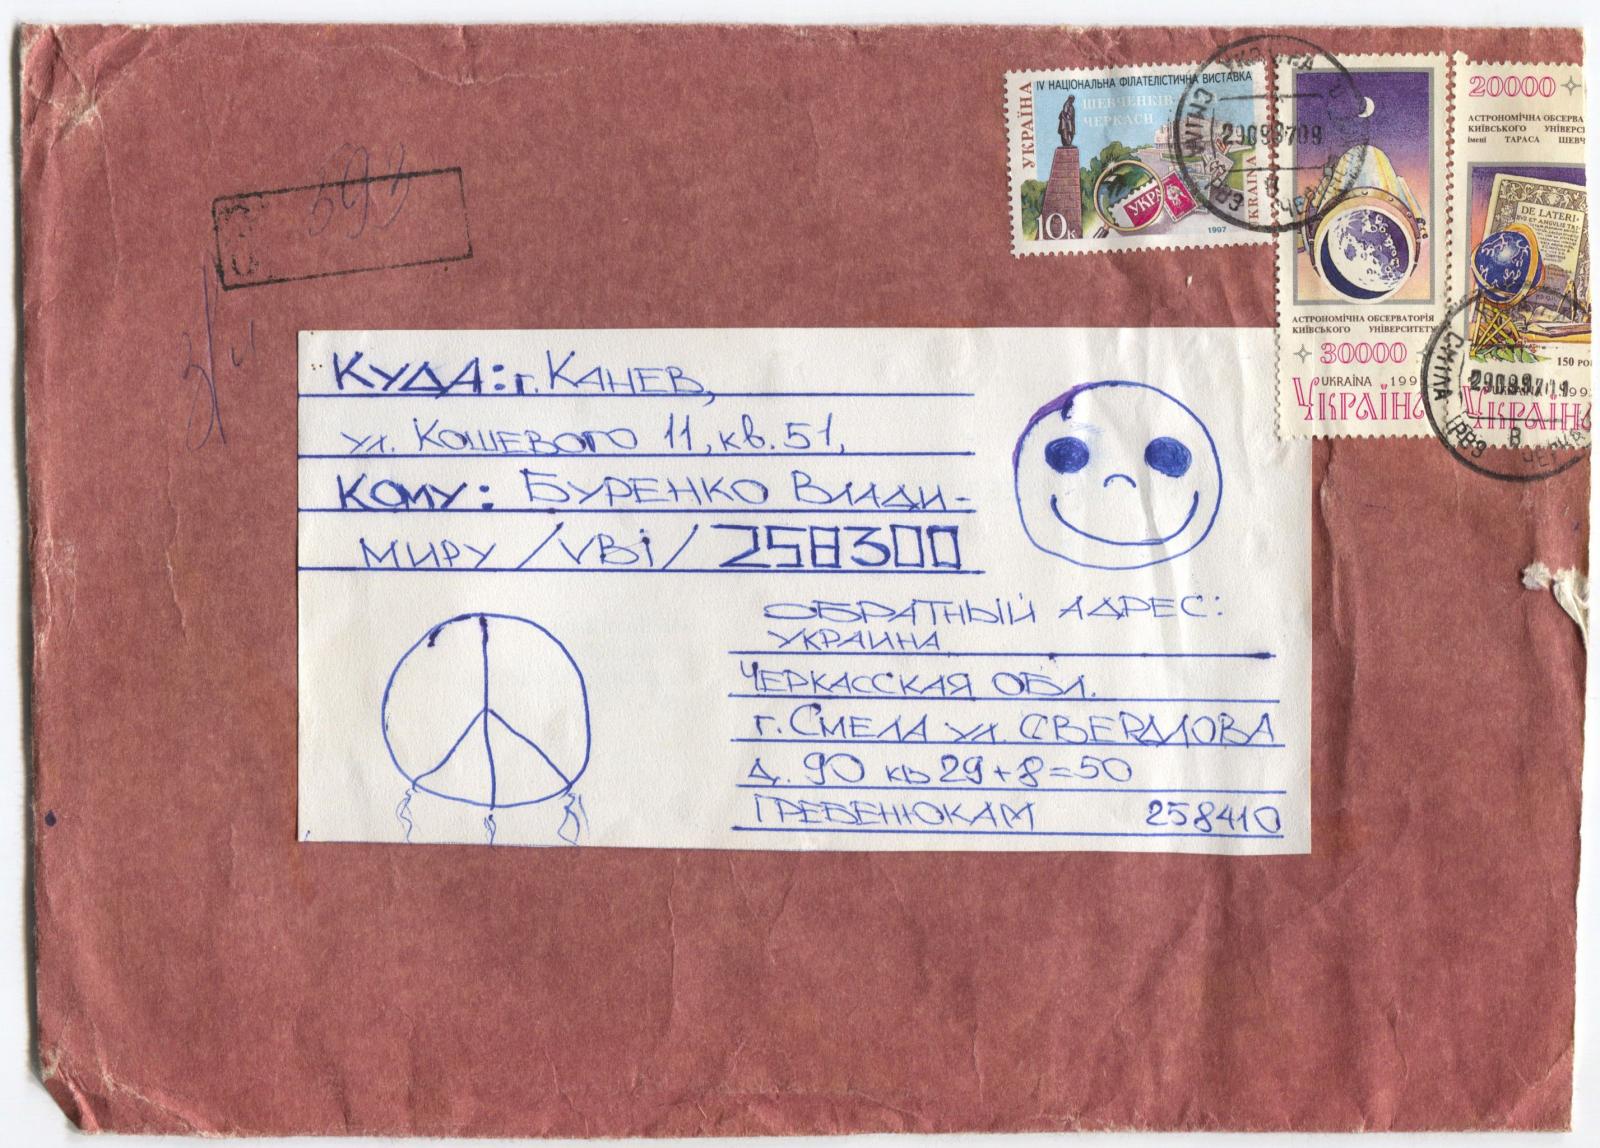 http://zxaaa.net/store/images/epson_to_vbi_19970929_0envelope.jpg